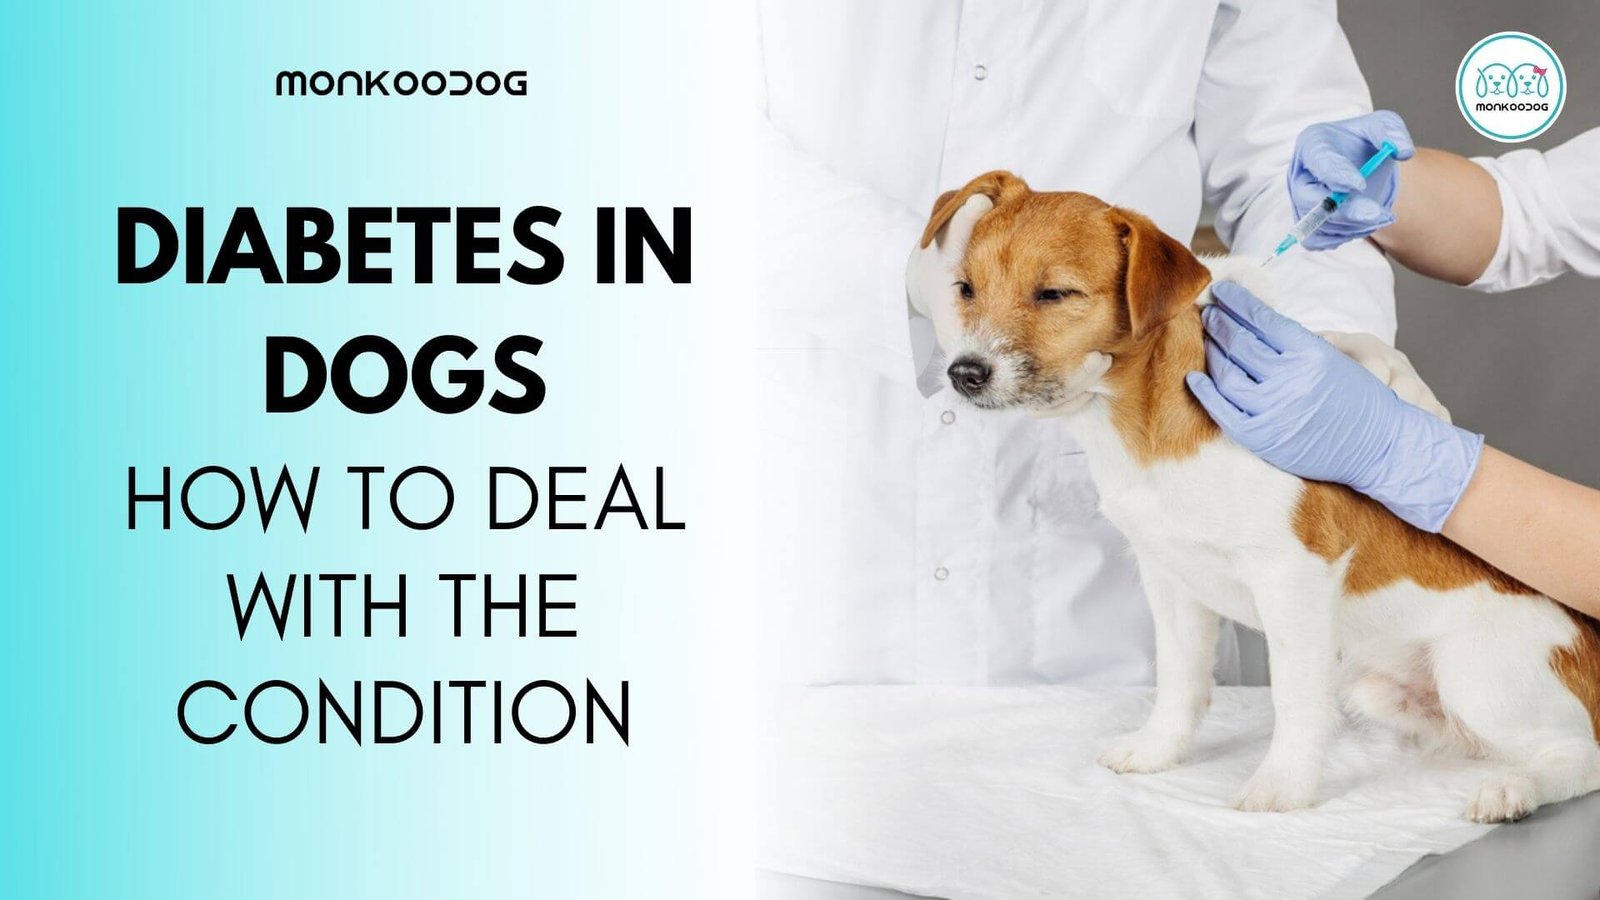 Dog Diabetes_ How To Deal With The Condition